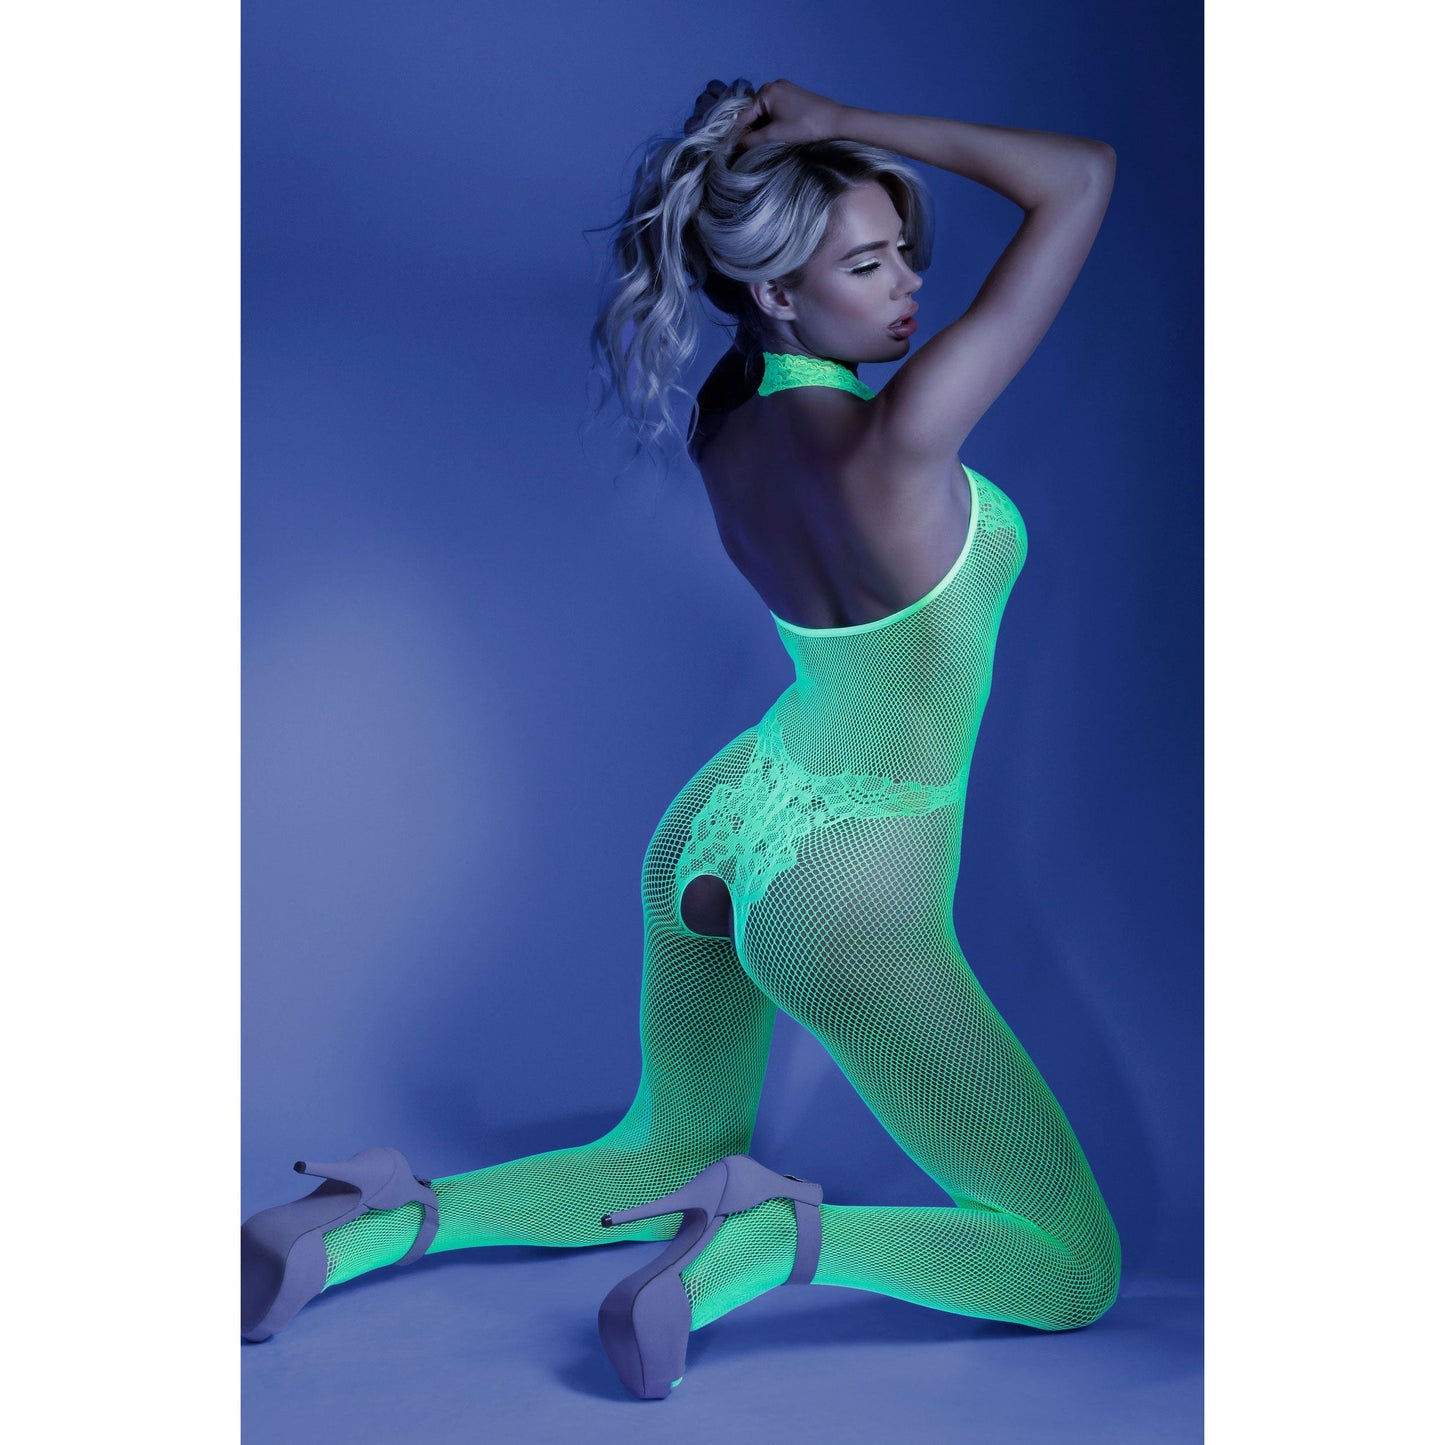 Moonbeam Crotchless Bodystocking - One Size - Neon Green